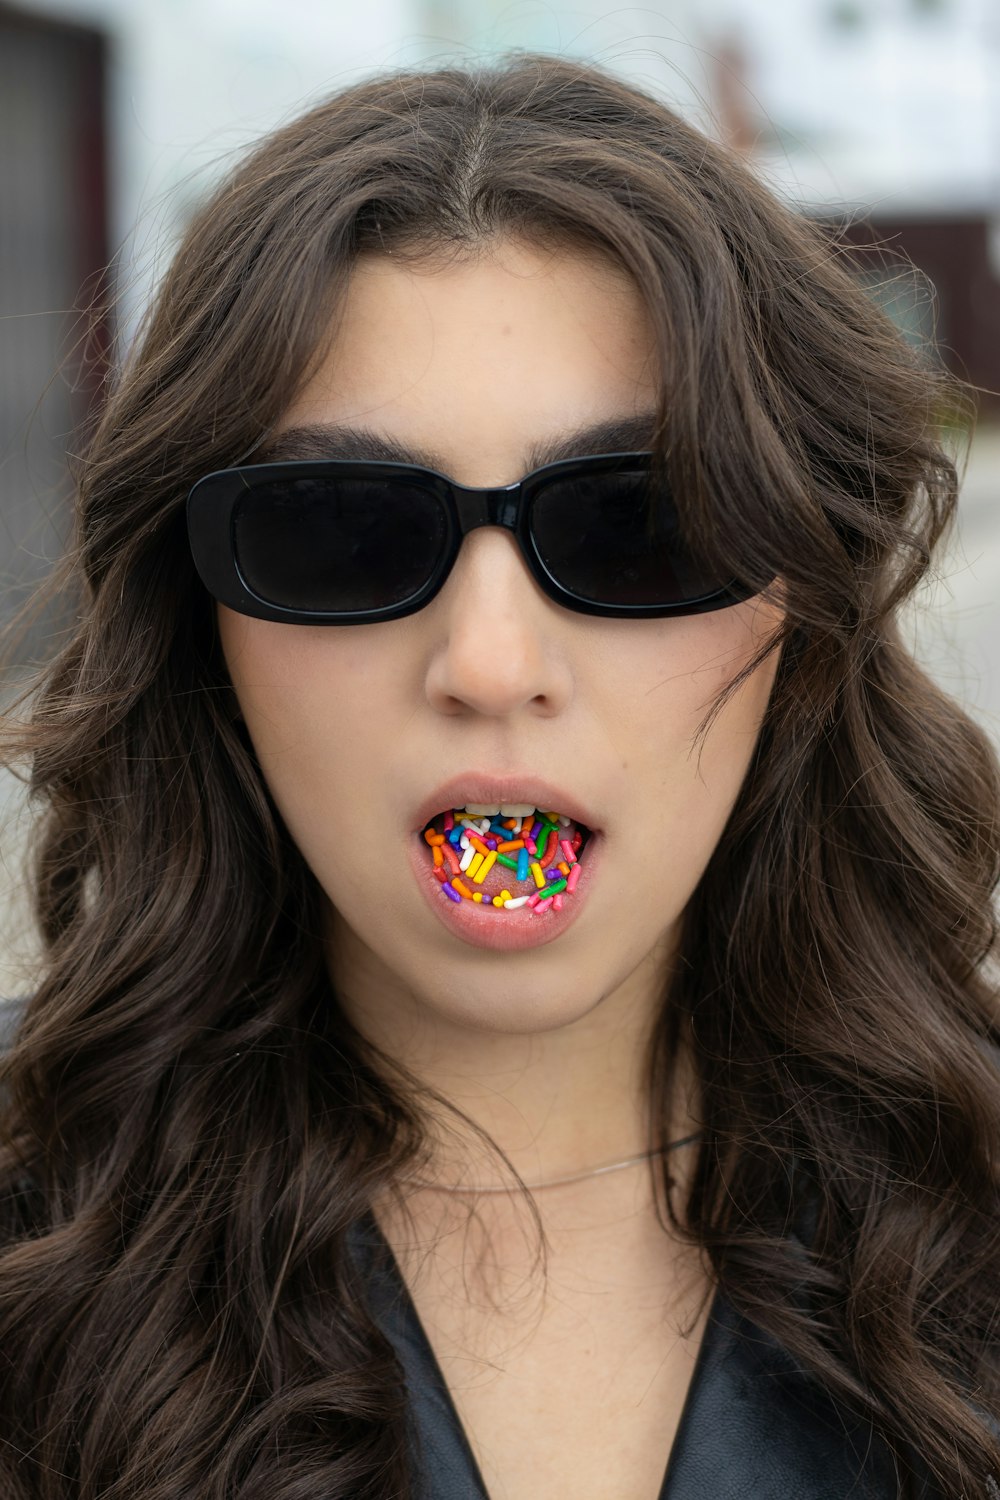 a woman wearing sunglasses and a fake doughnut in her mouth